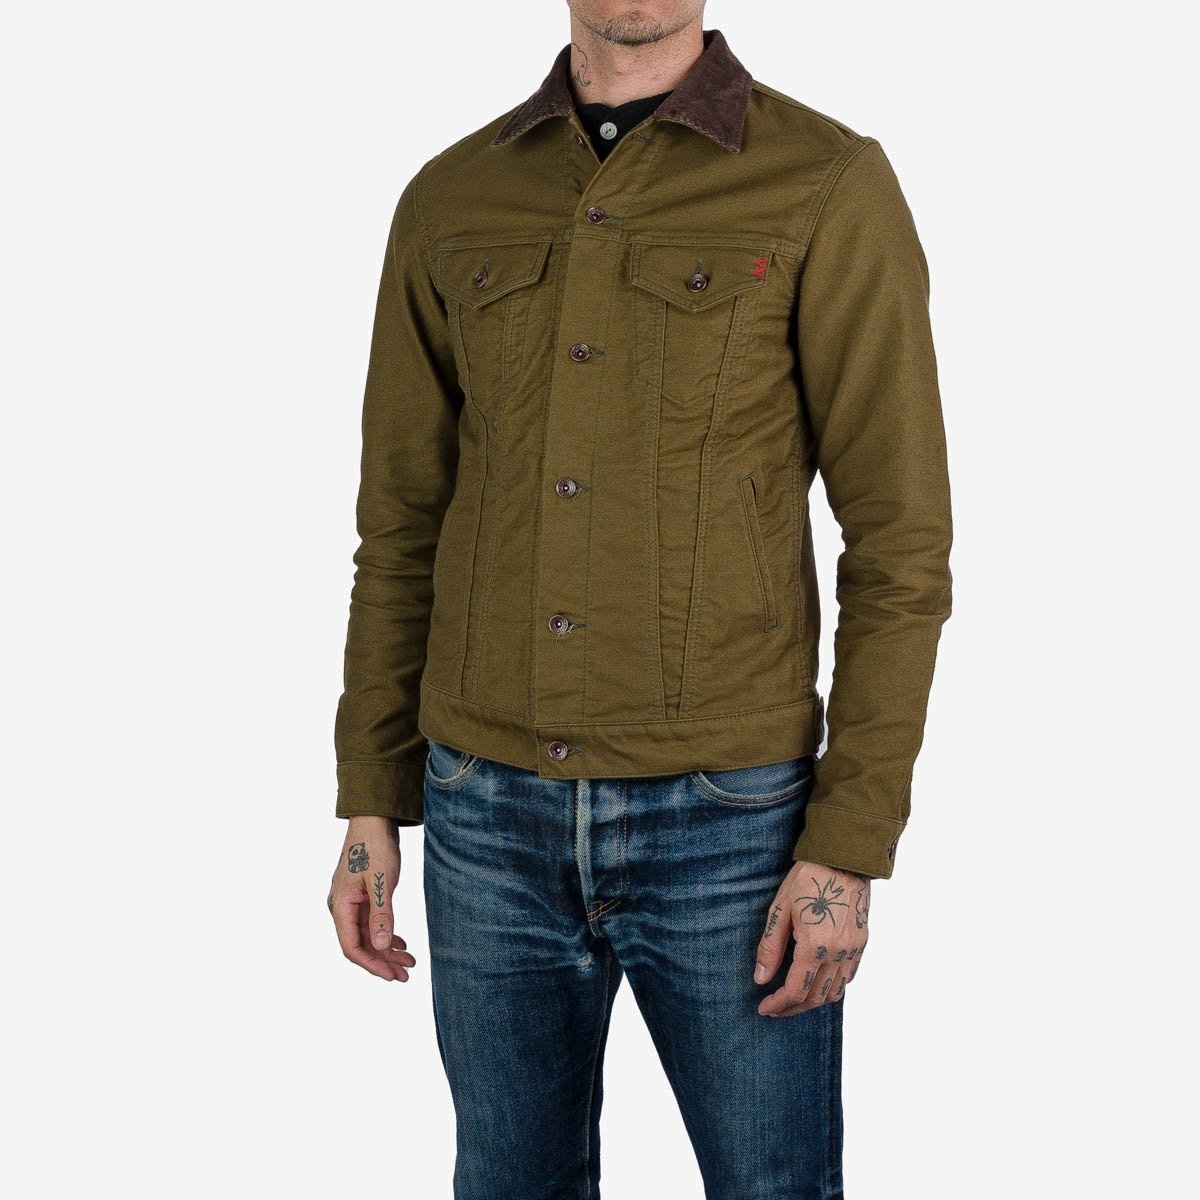 IH-526-ODG 12oz Whipcord Modified Type III Jacket - Olive Drab Green - 3